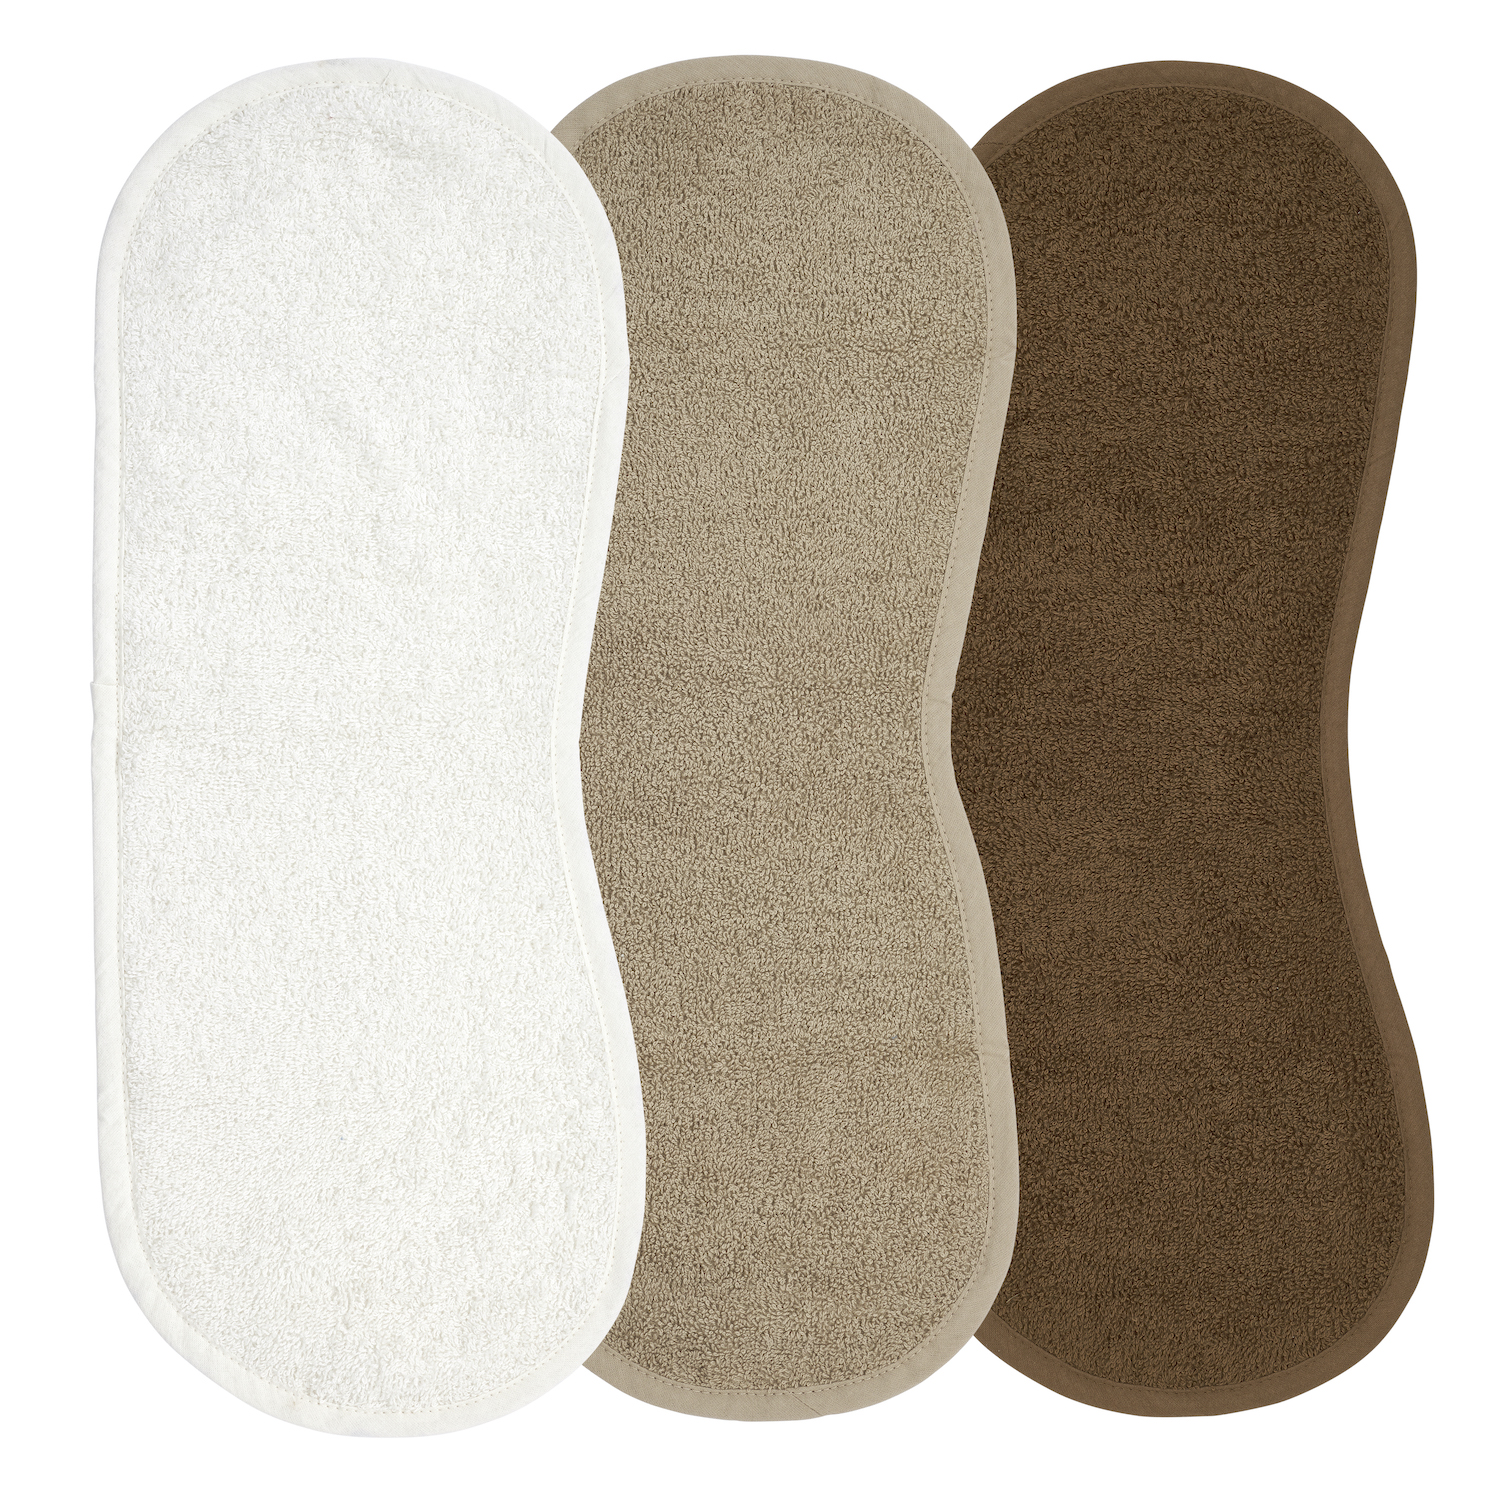 Basic Terry Burp Cloths Shoulder Model 3-pack  - Offwhite/Taupe/Chocolate - 53x20cm